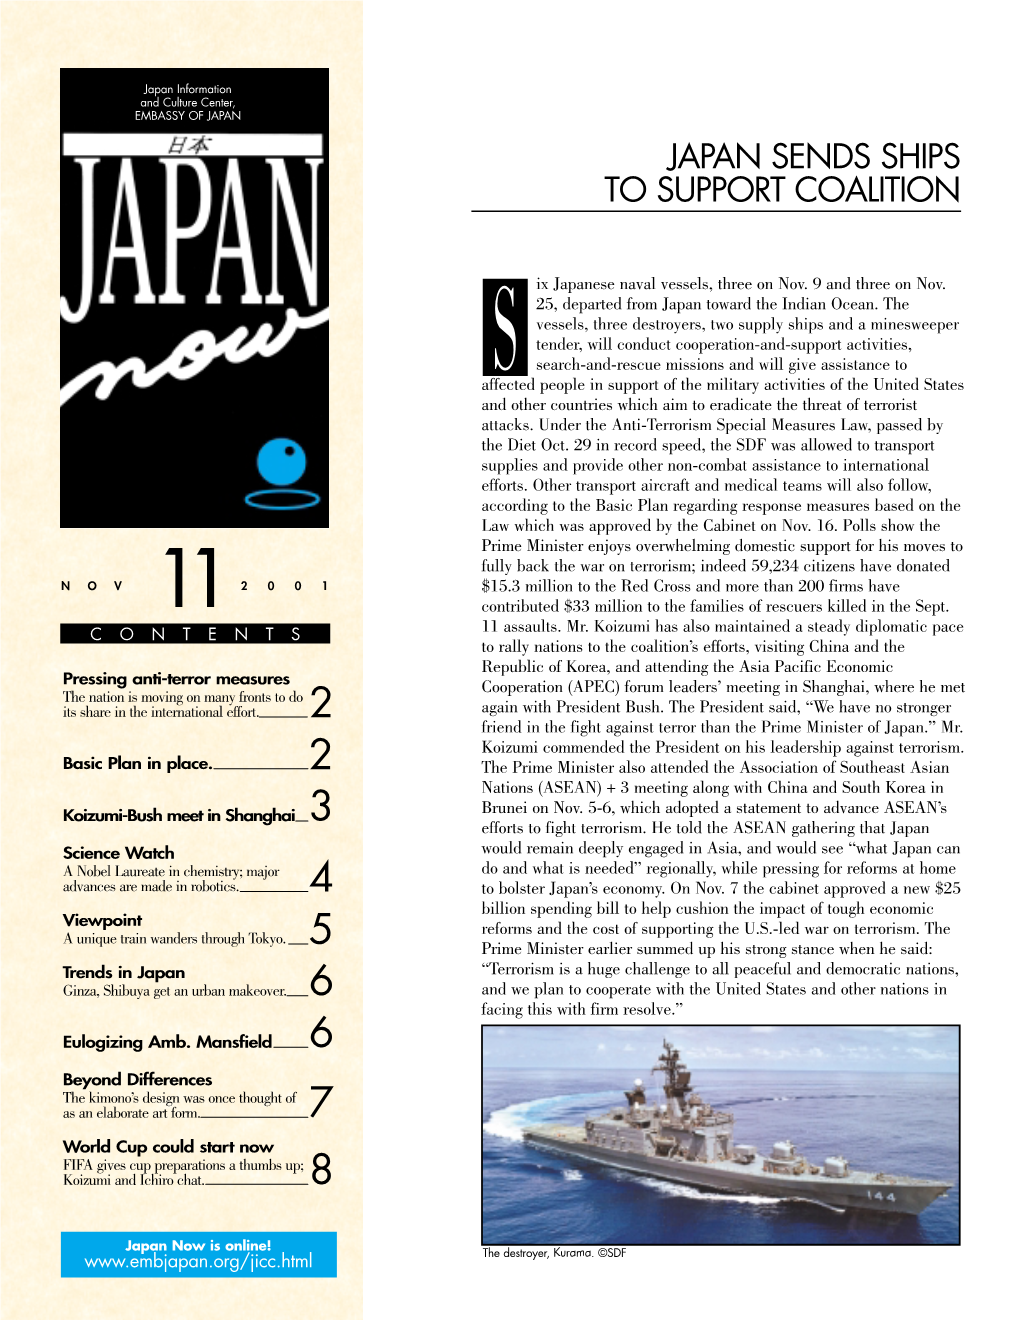 Japan Sends Ships to Support Coalition